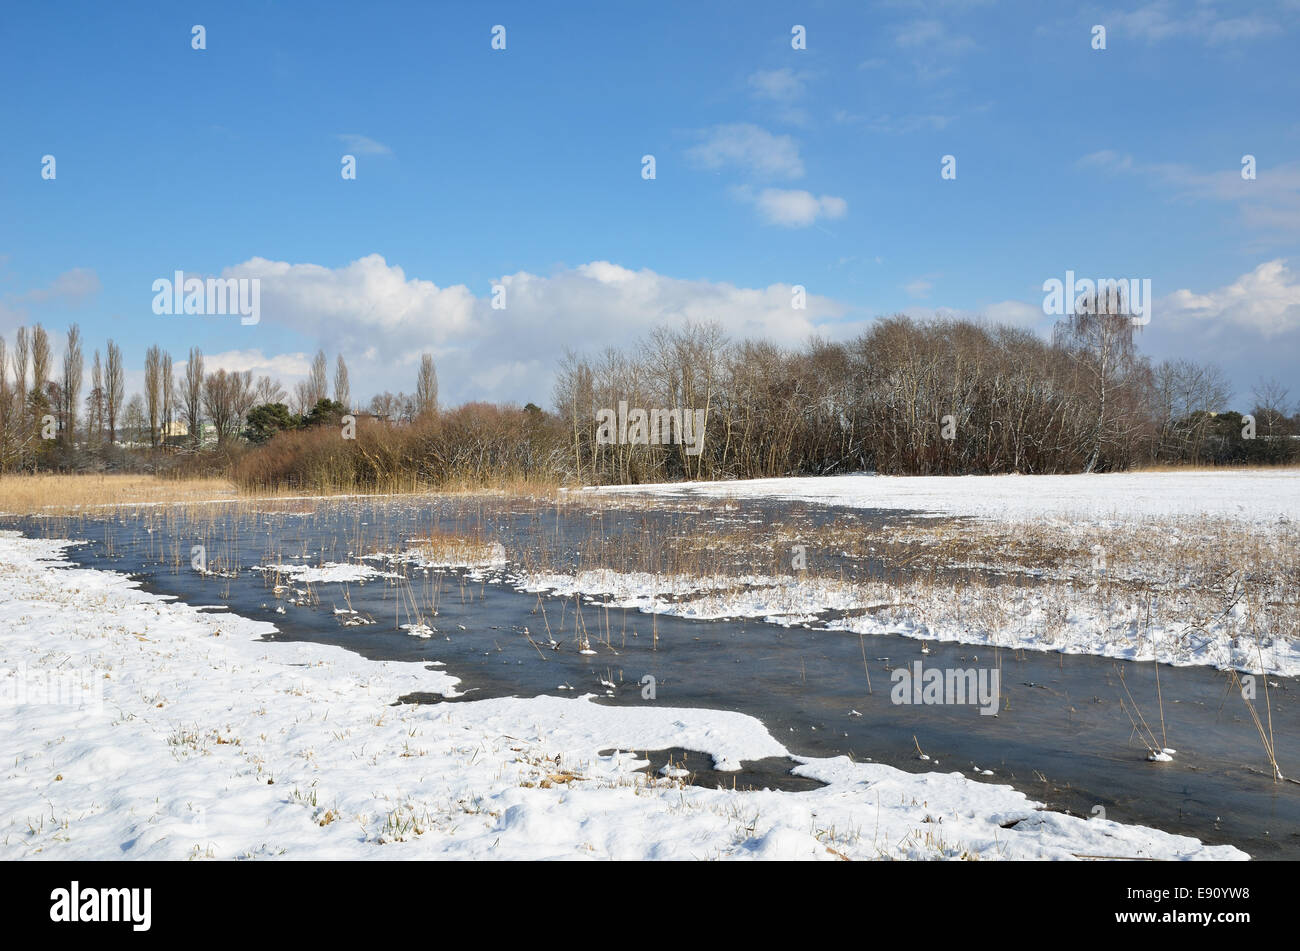 Flood plain is covered with light snow. There are several shrubs and trees, a pond or swamp. Stock Photo